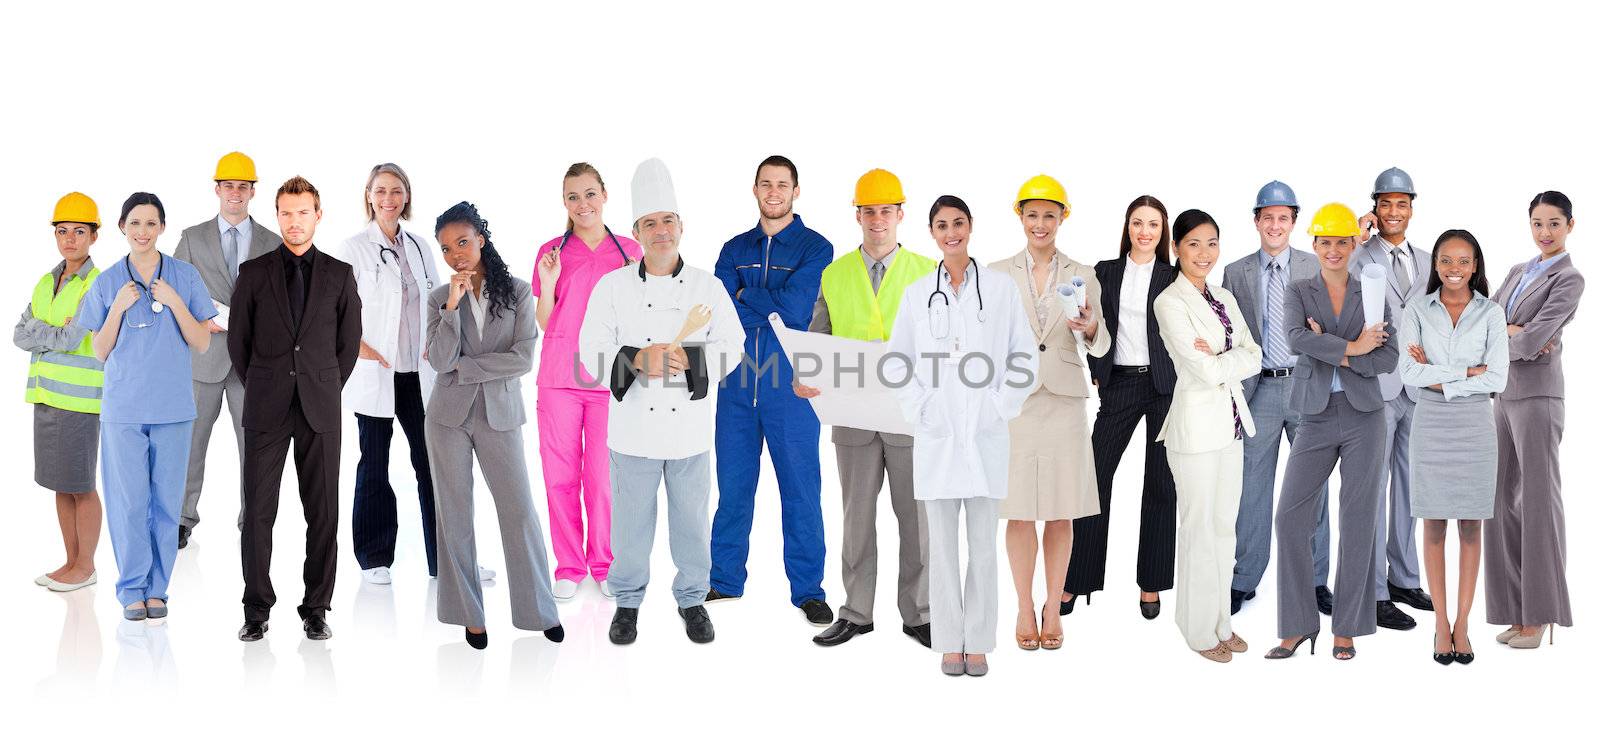 Large diverse group of workers on white background